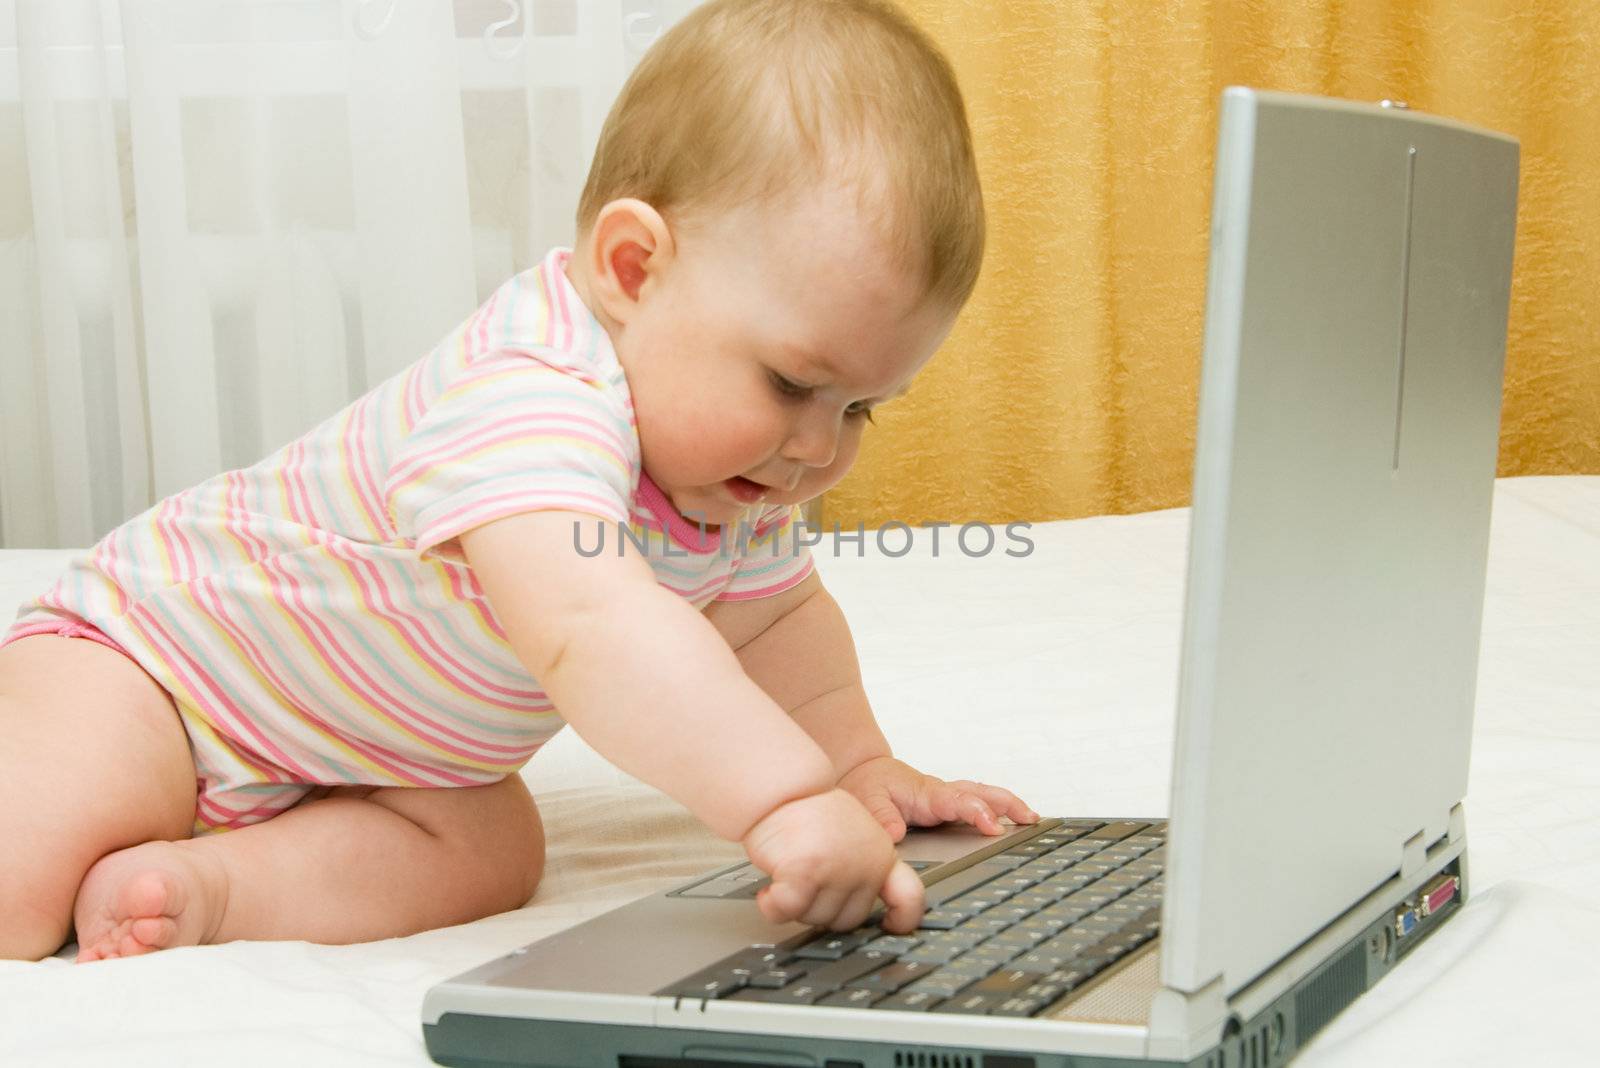 Small baby and laptop by rbv